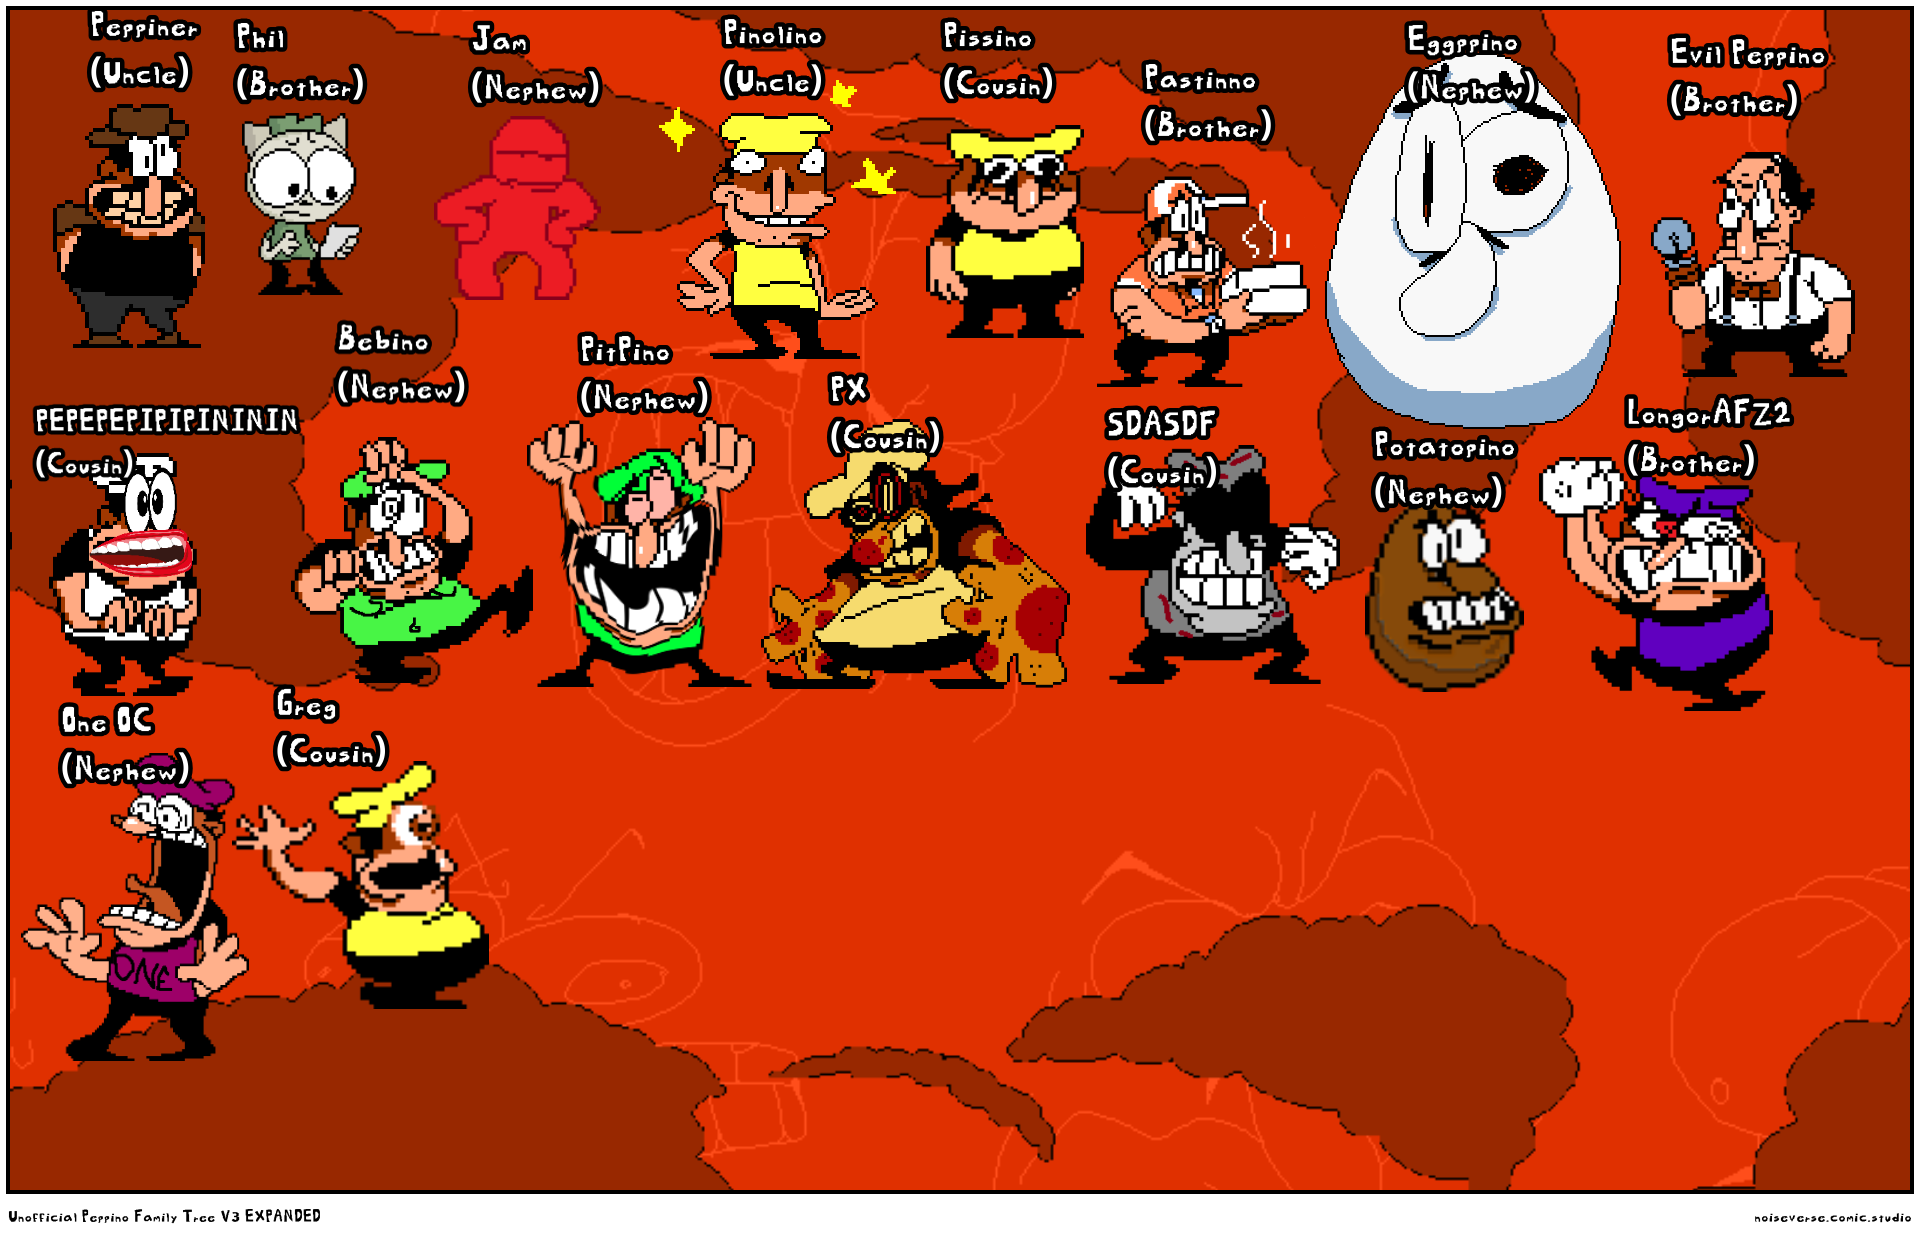 Unofficial Peppino Family Tree V3 EXPANDED